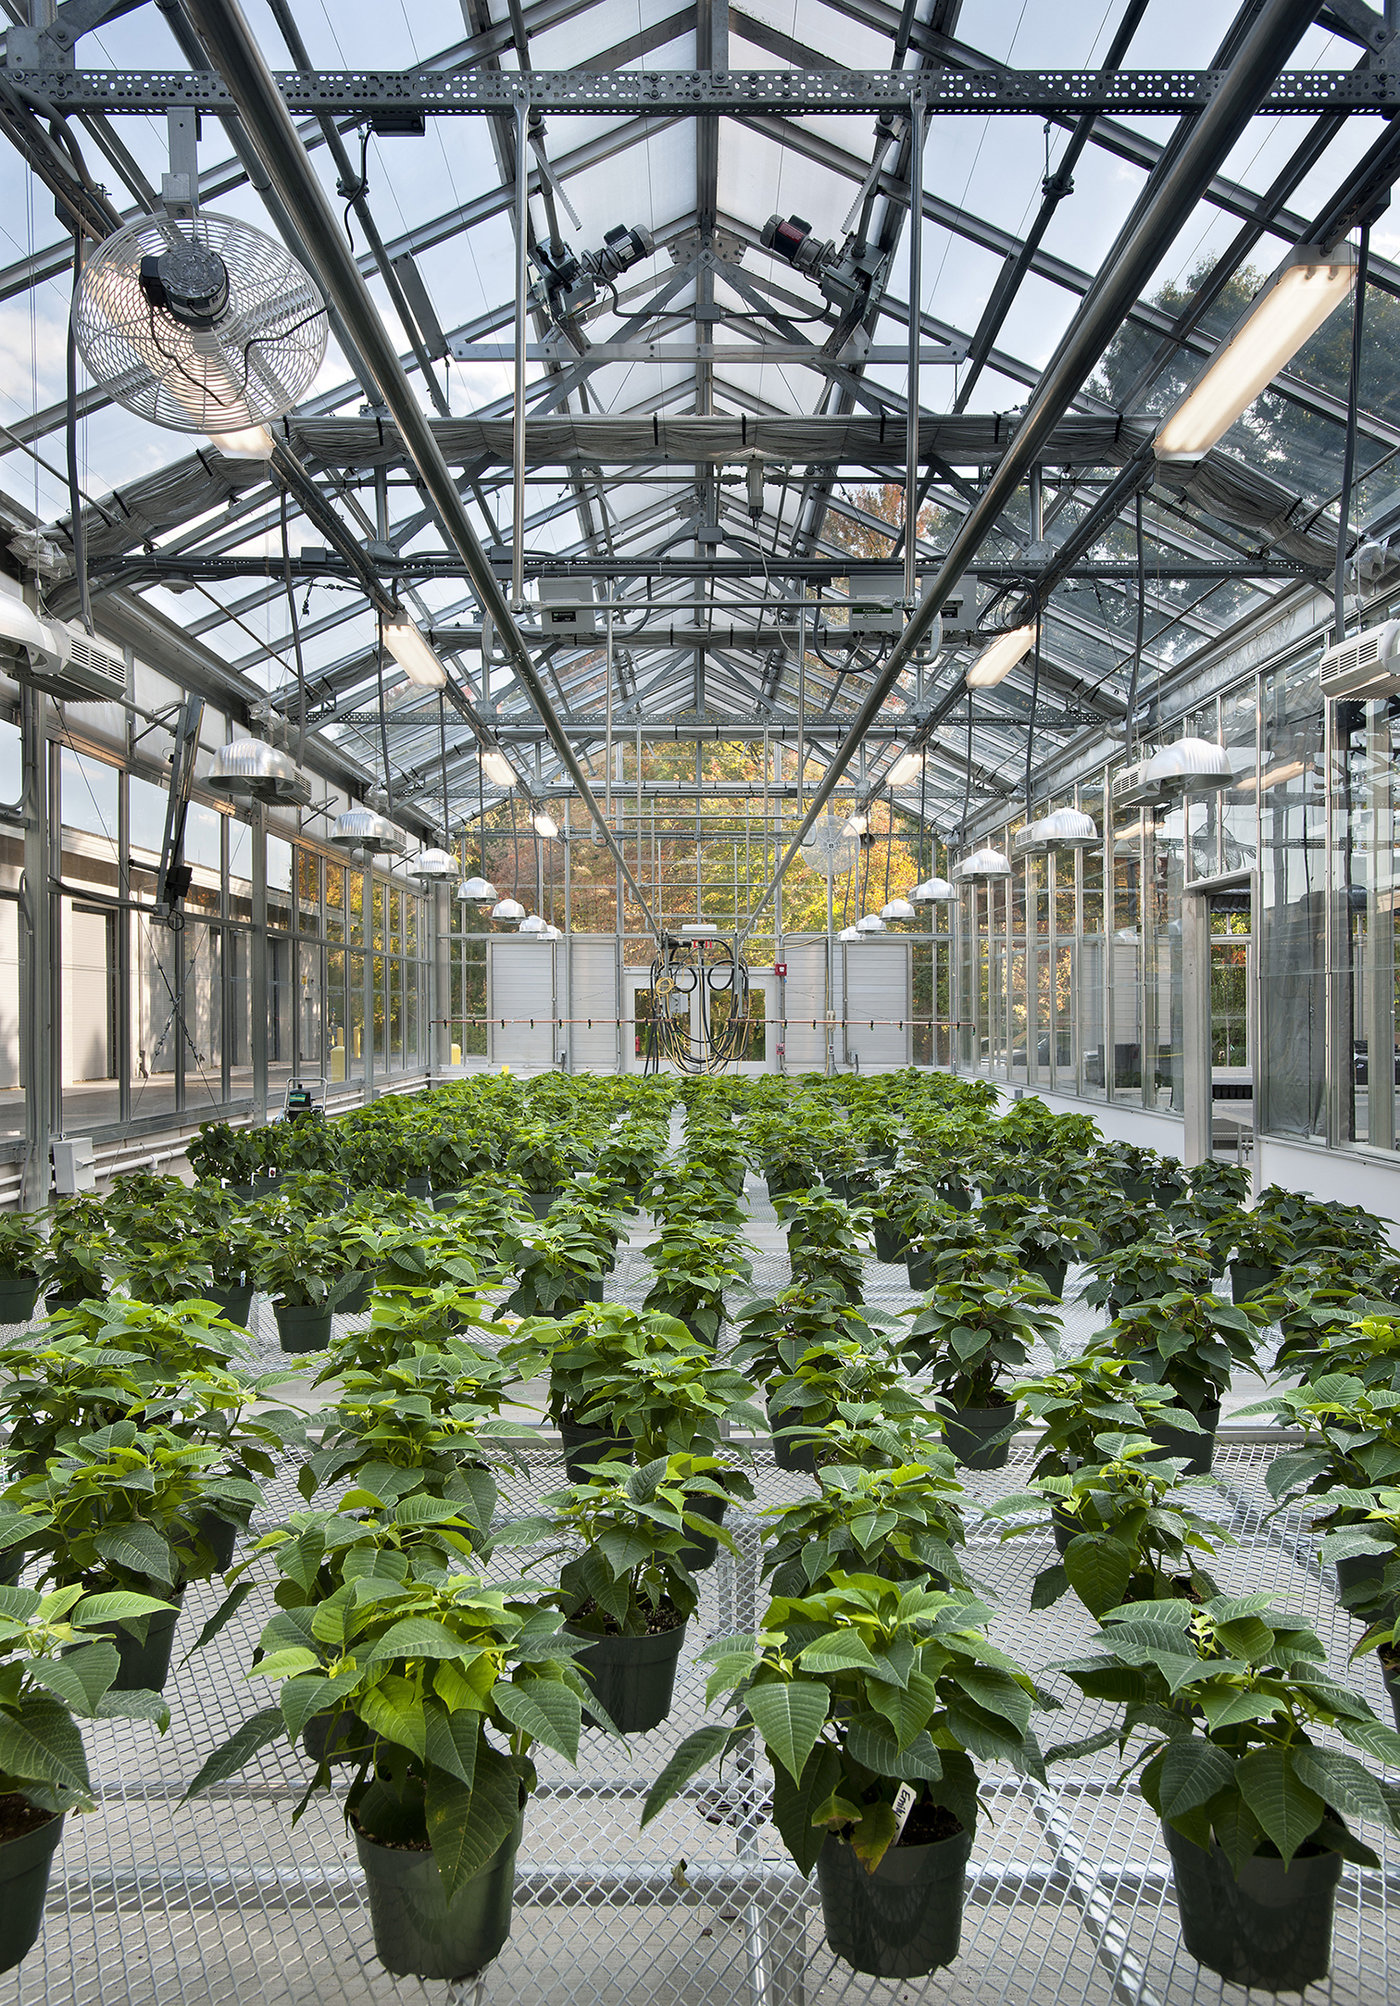 02 tskp vernon cleaves science agricultural center high school greenhouse plants 1400 xxx q85